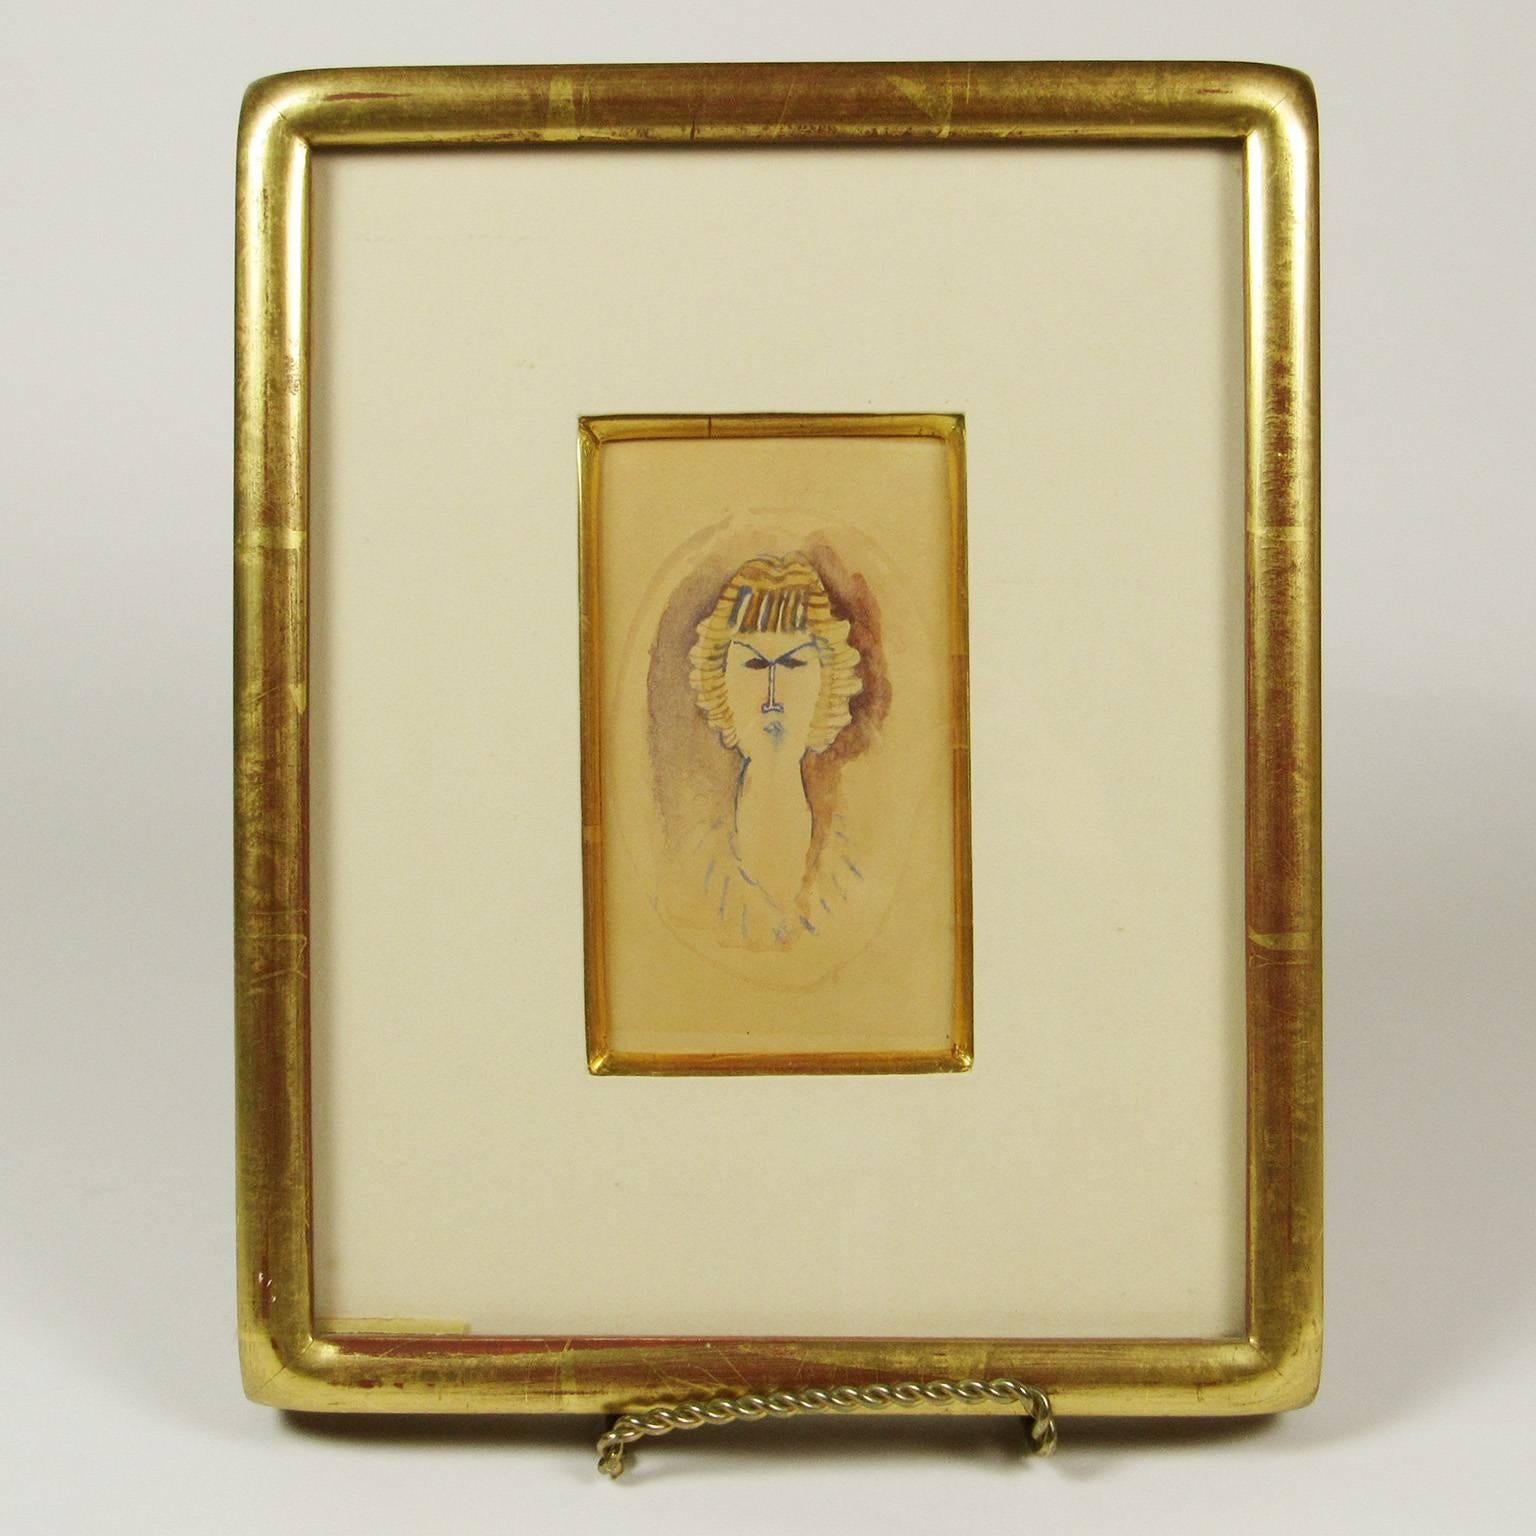 Jules Pascin (French or American, 1885-1930) portrait of Marie Laurencin, circa 1917; watercolor on paper, matted in giltwood frame. Inscribed on verso: 